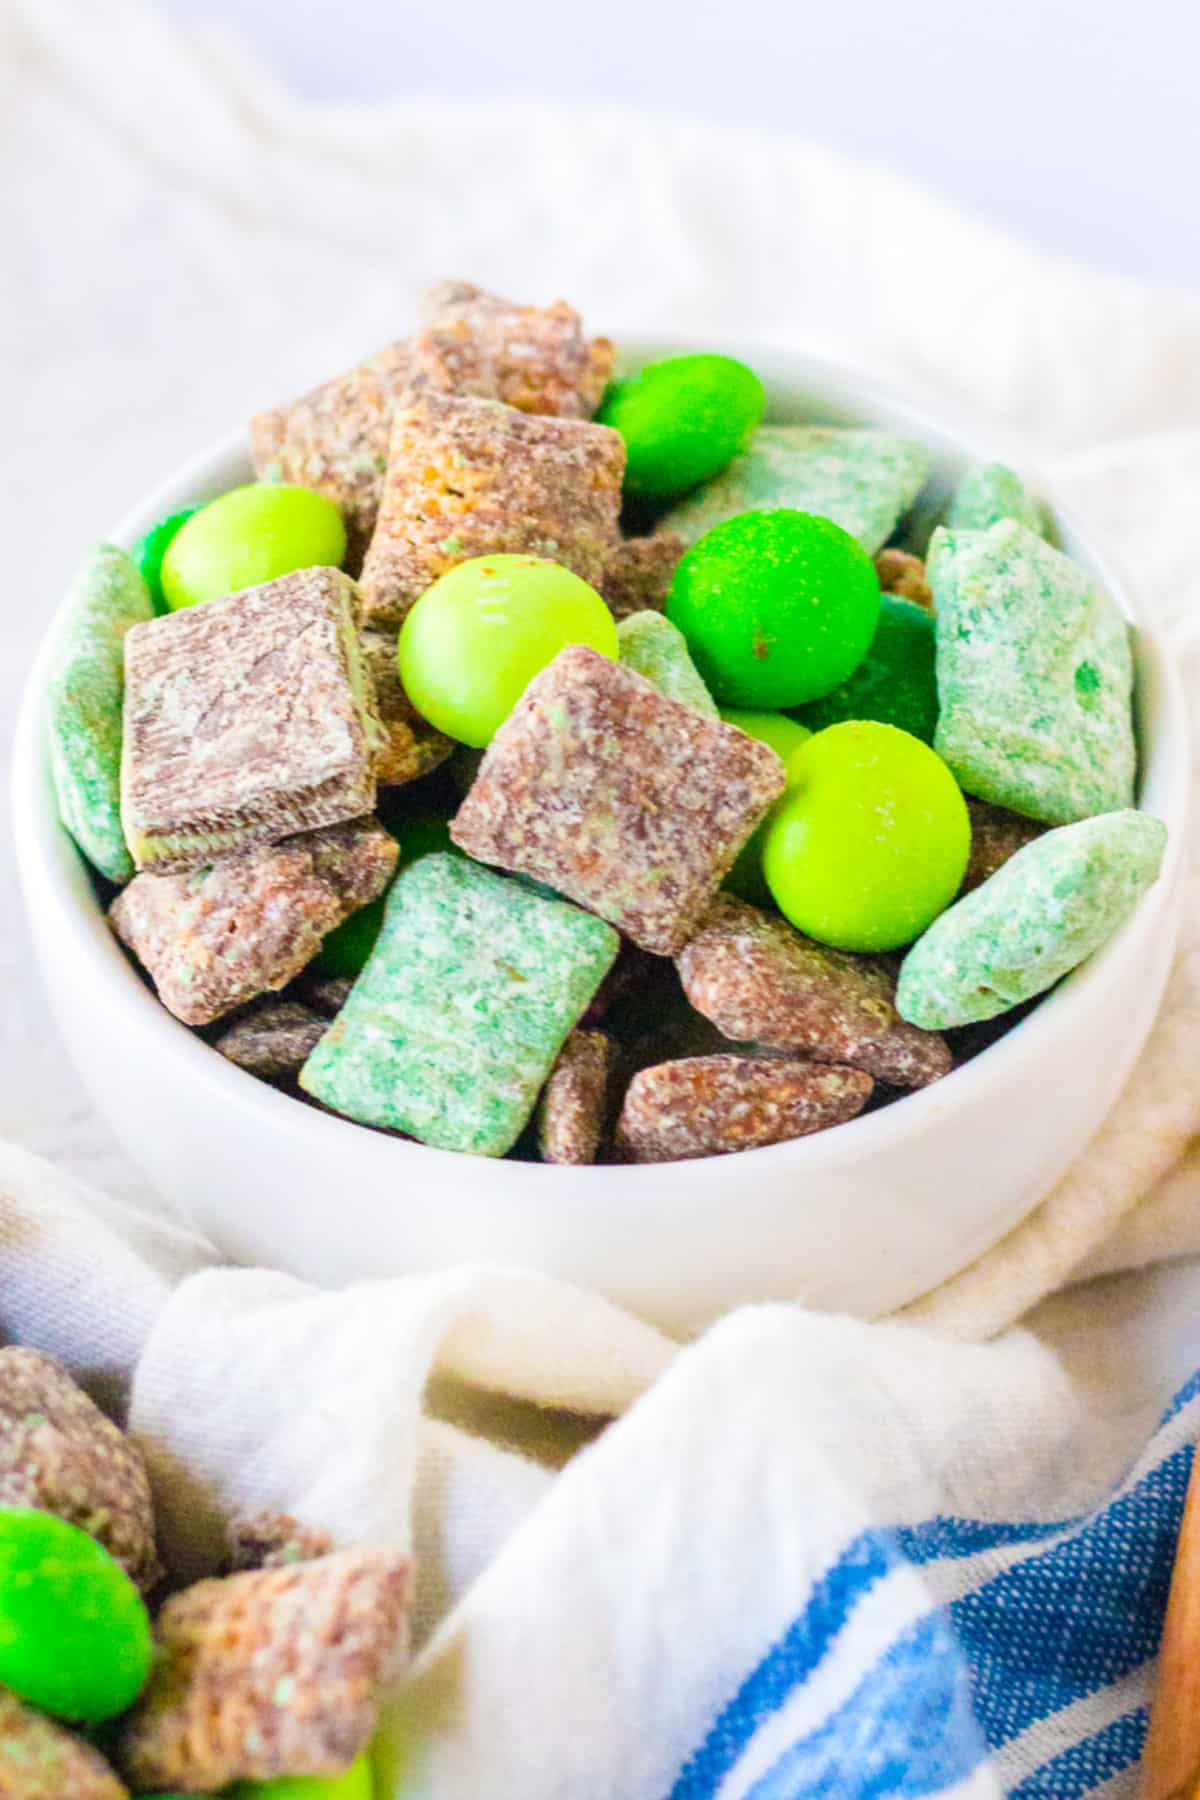 Mint muddy buddies with brown and green covered chex in a snack bowl from the side.